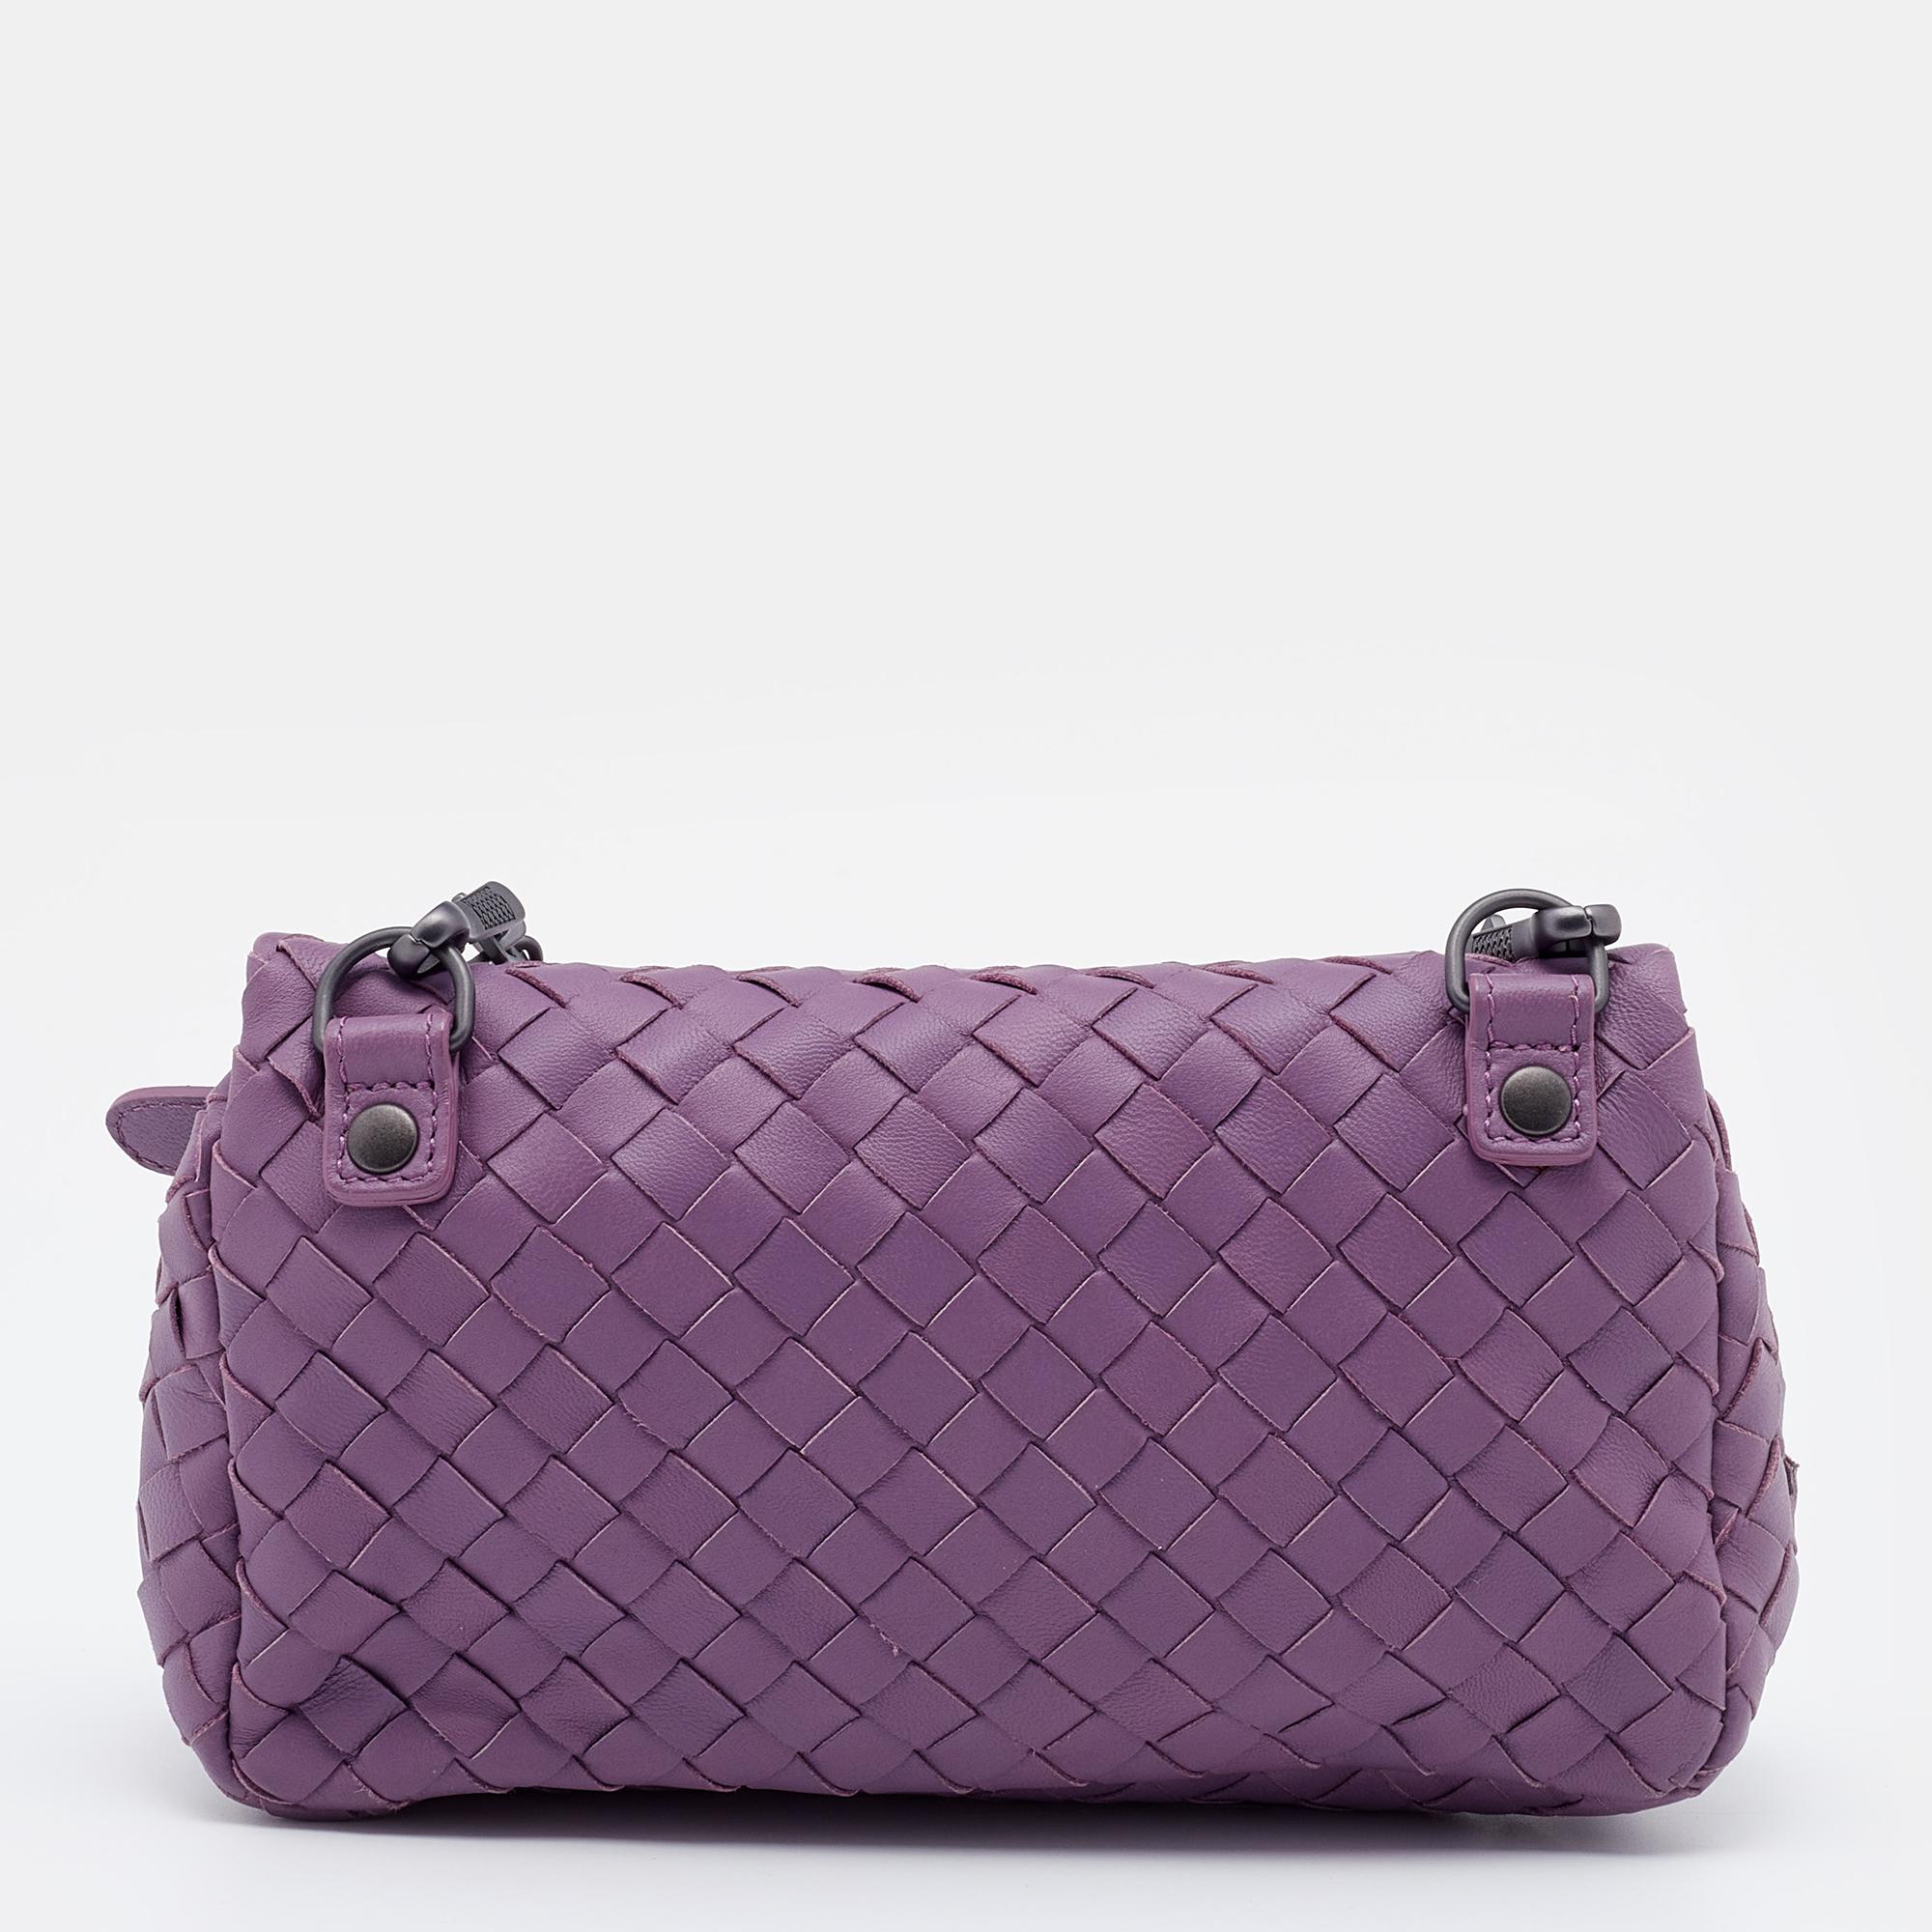 This Bottega Veneta bag presents the label's artistry in fine craftsmanship and classic designs. Sewn using Intrecciato leather, it features a light purple shade, shoulder chain, and flap that opens to reveal a suede interior for your essentials.

